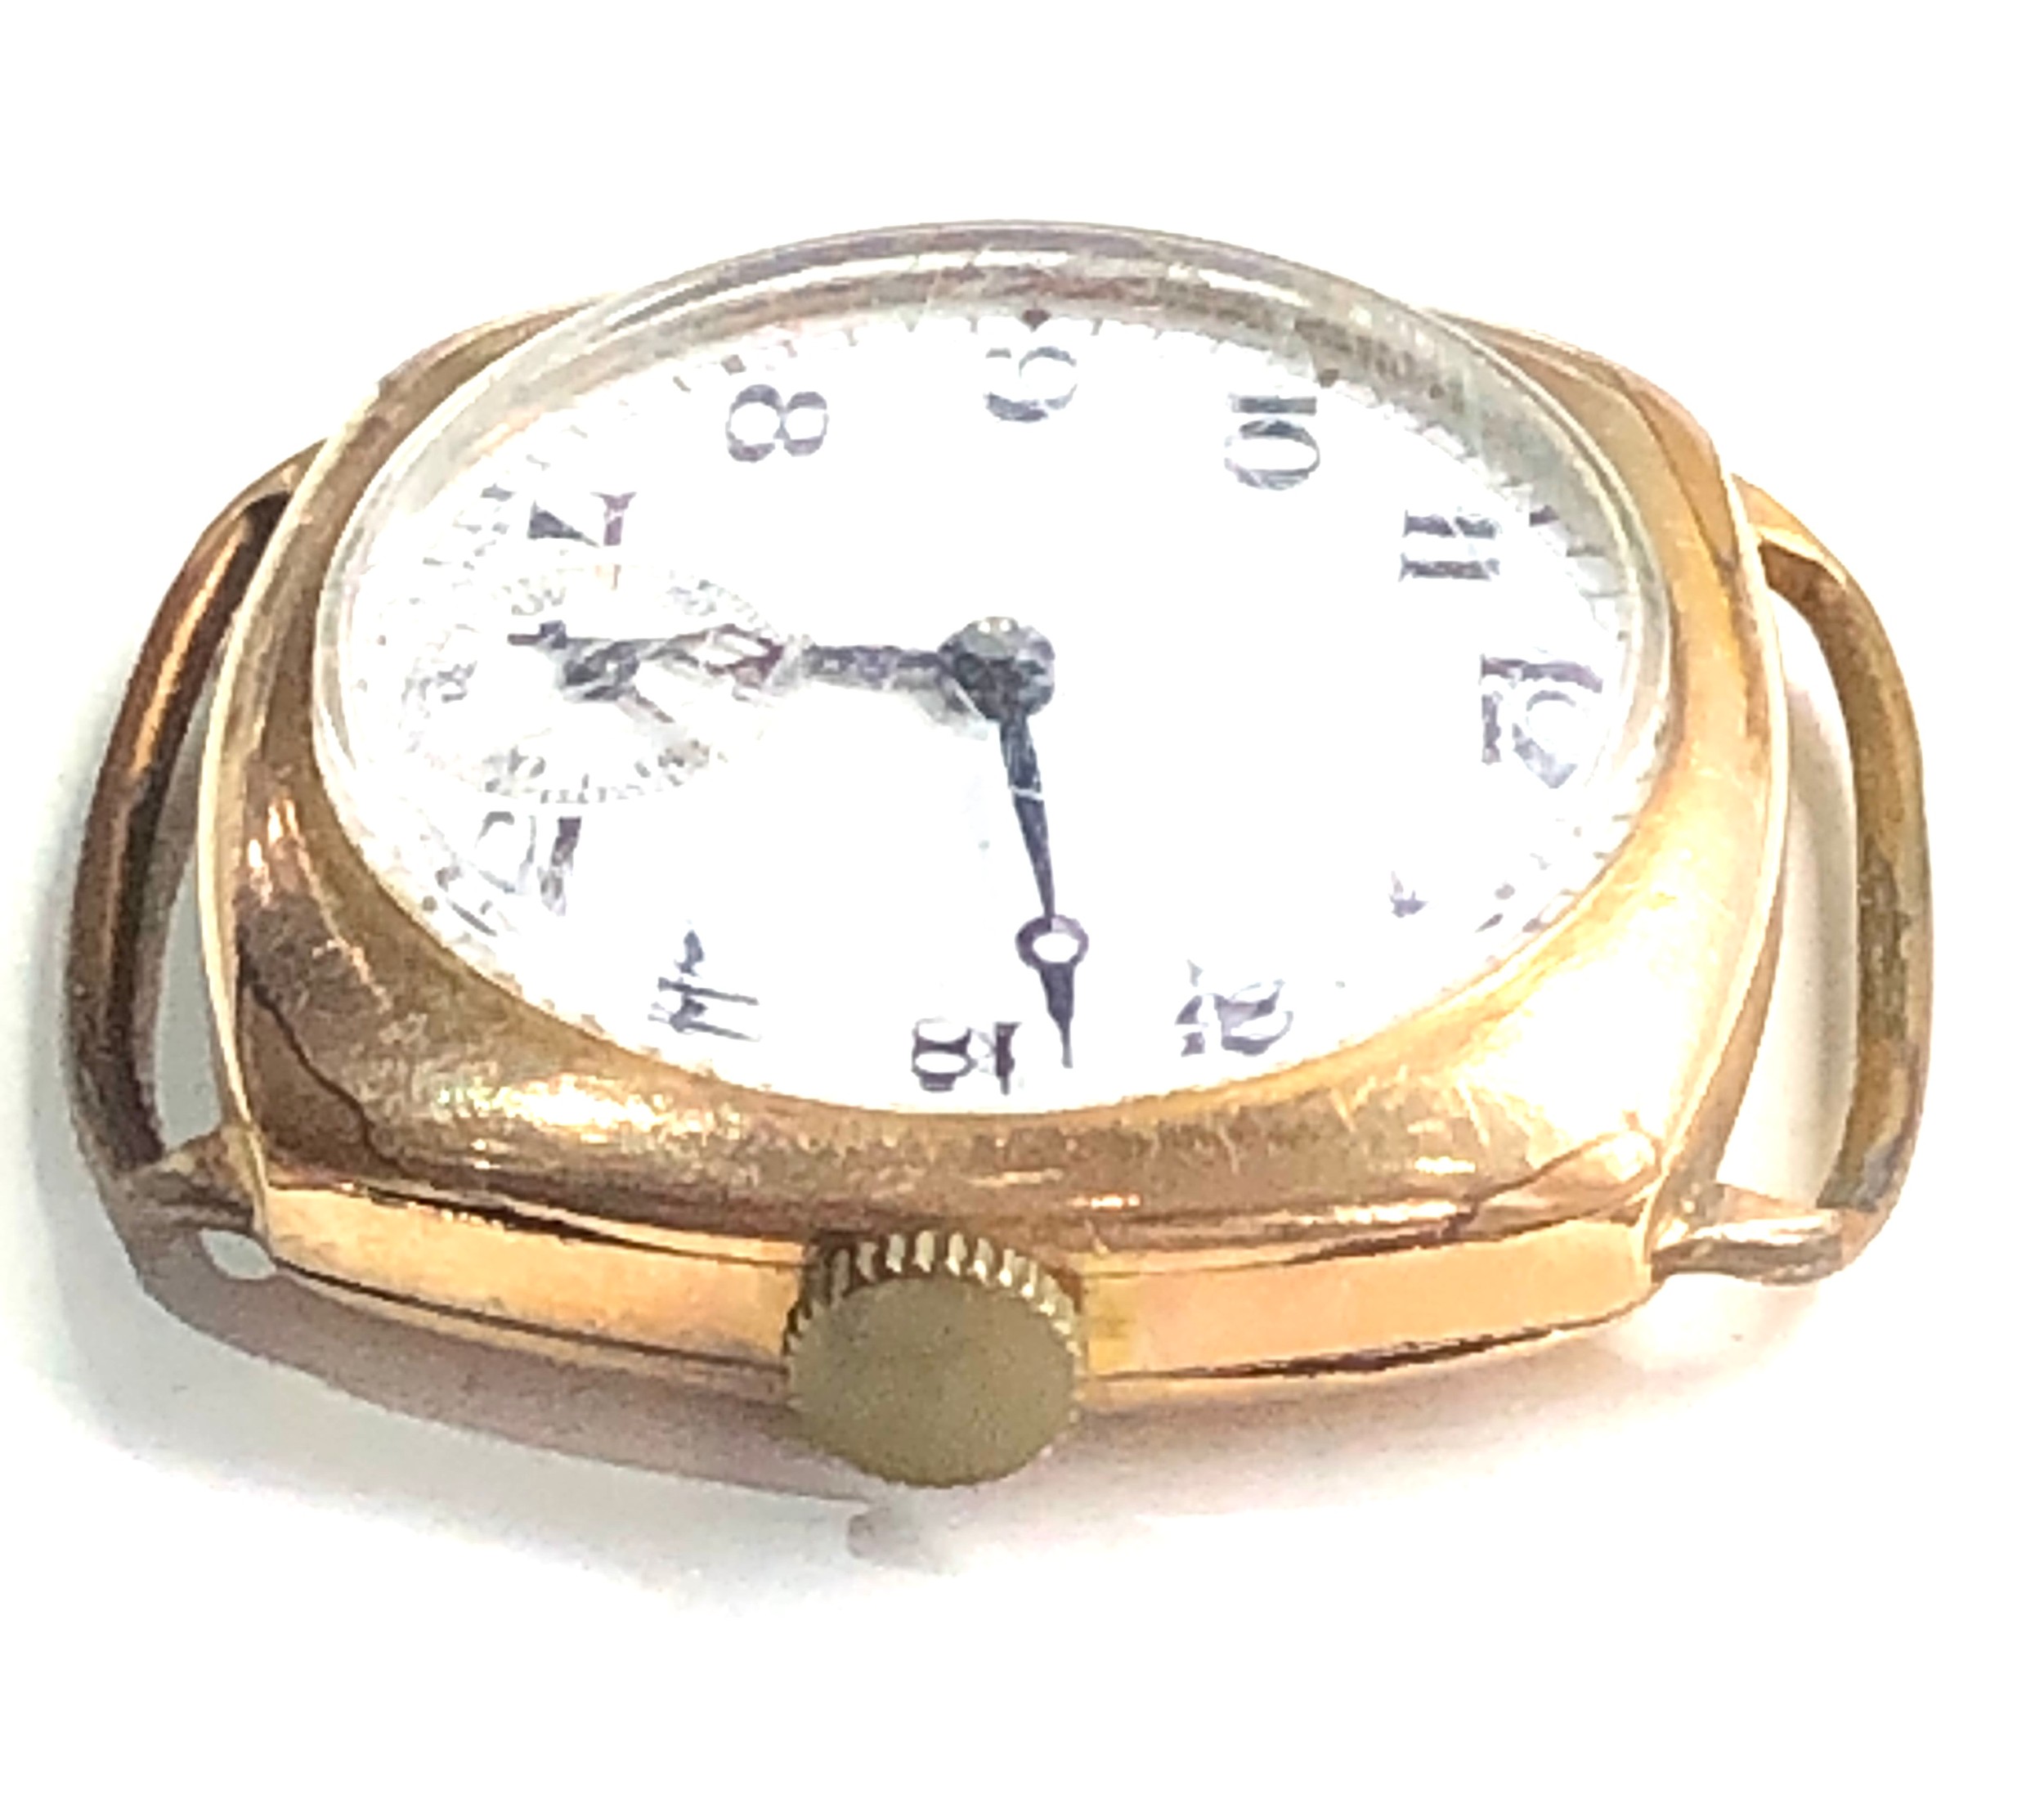 1930s Omega gold plated gents wristwatch the watch is ticking but no warranty given engraved on back - Image 2 of 6